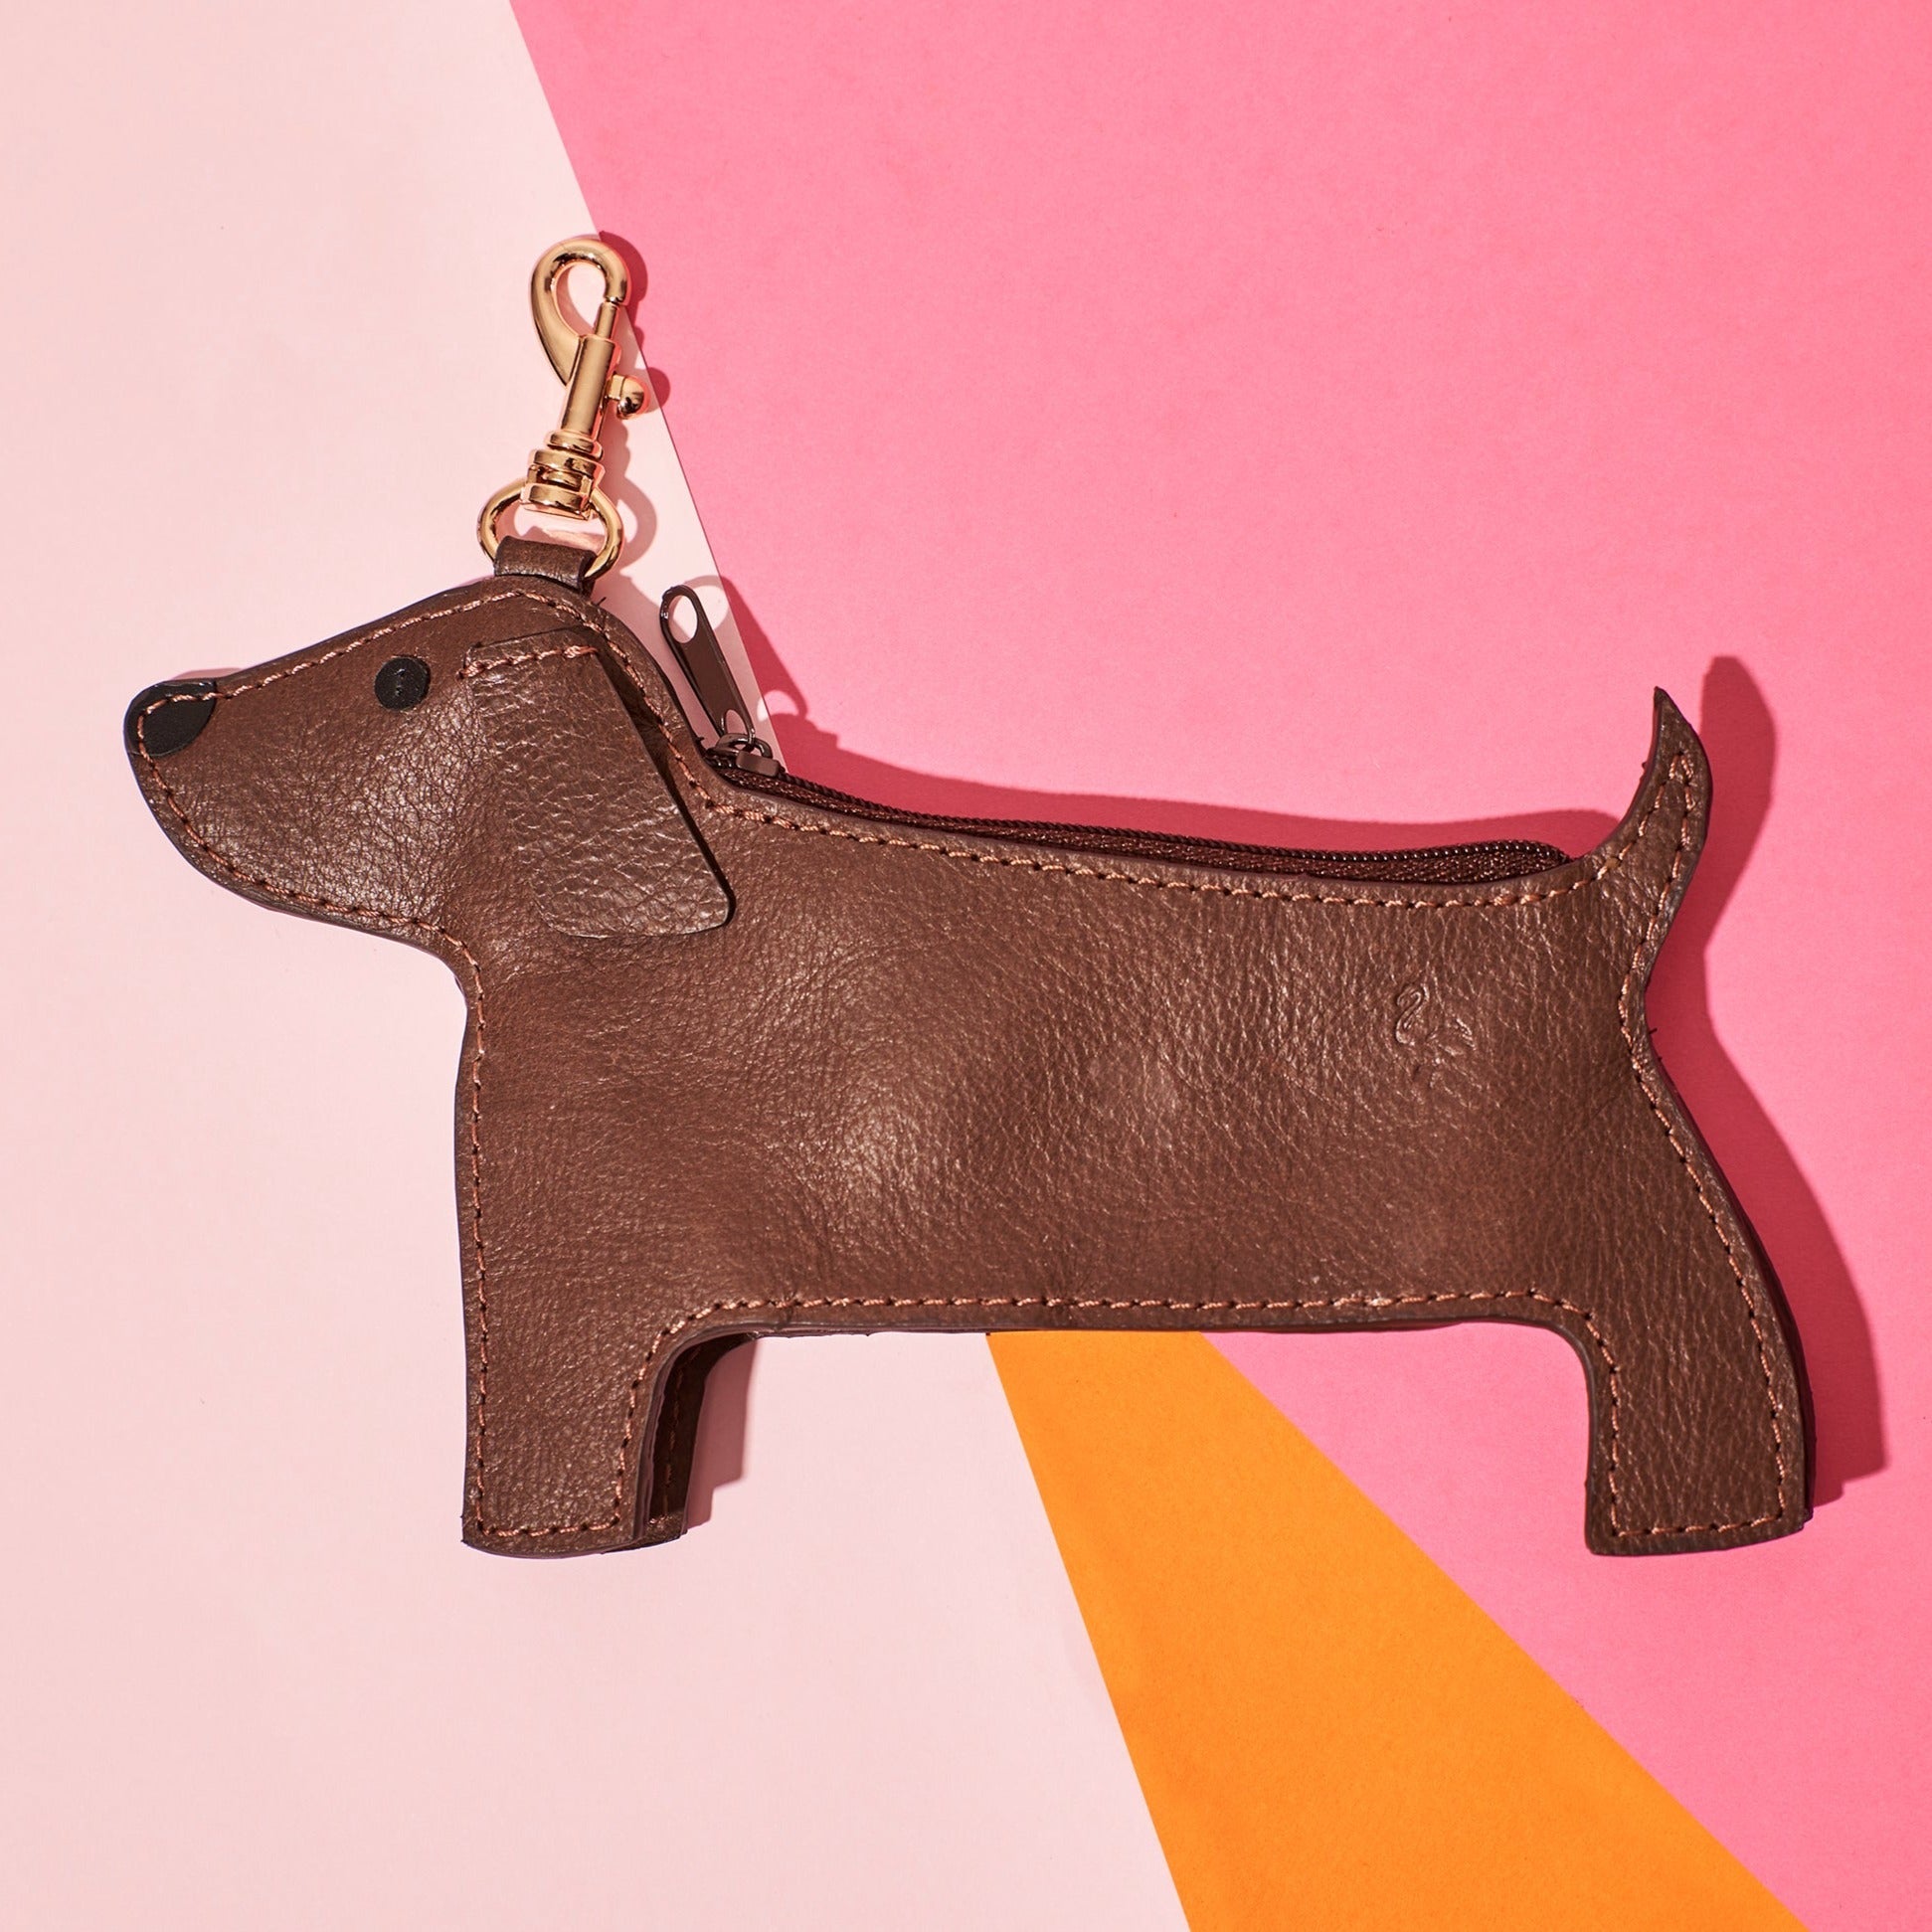 Wicker Darling's Salami the dachshund coin purse on a colourful background